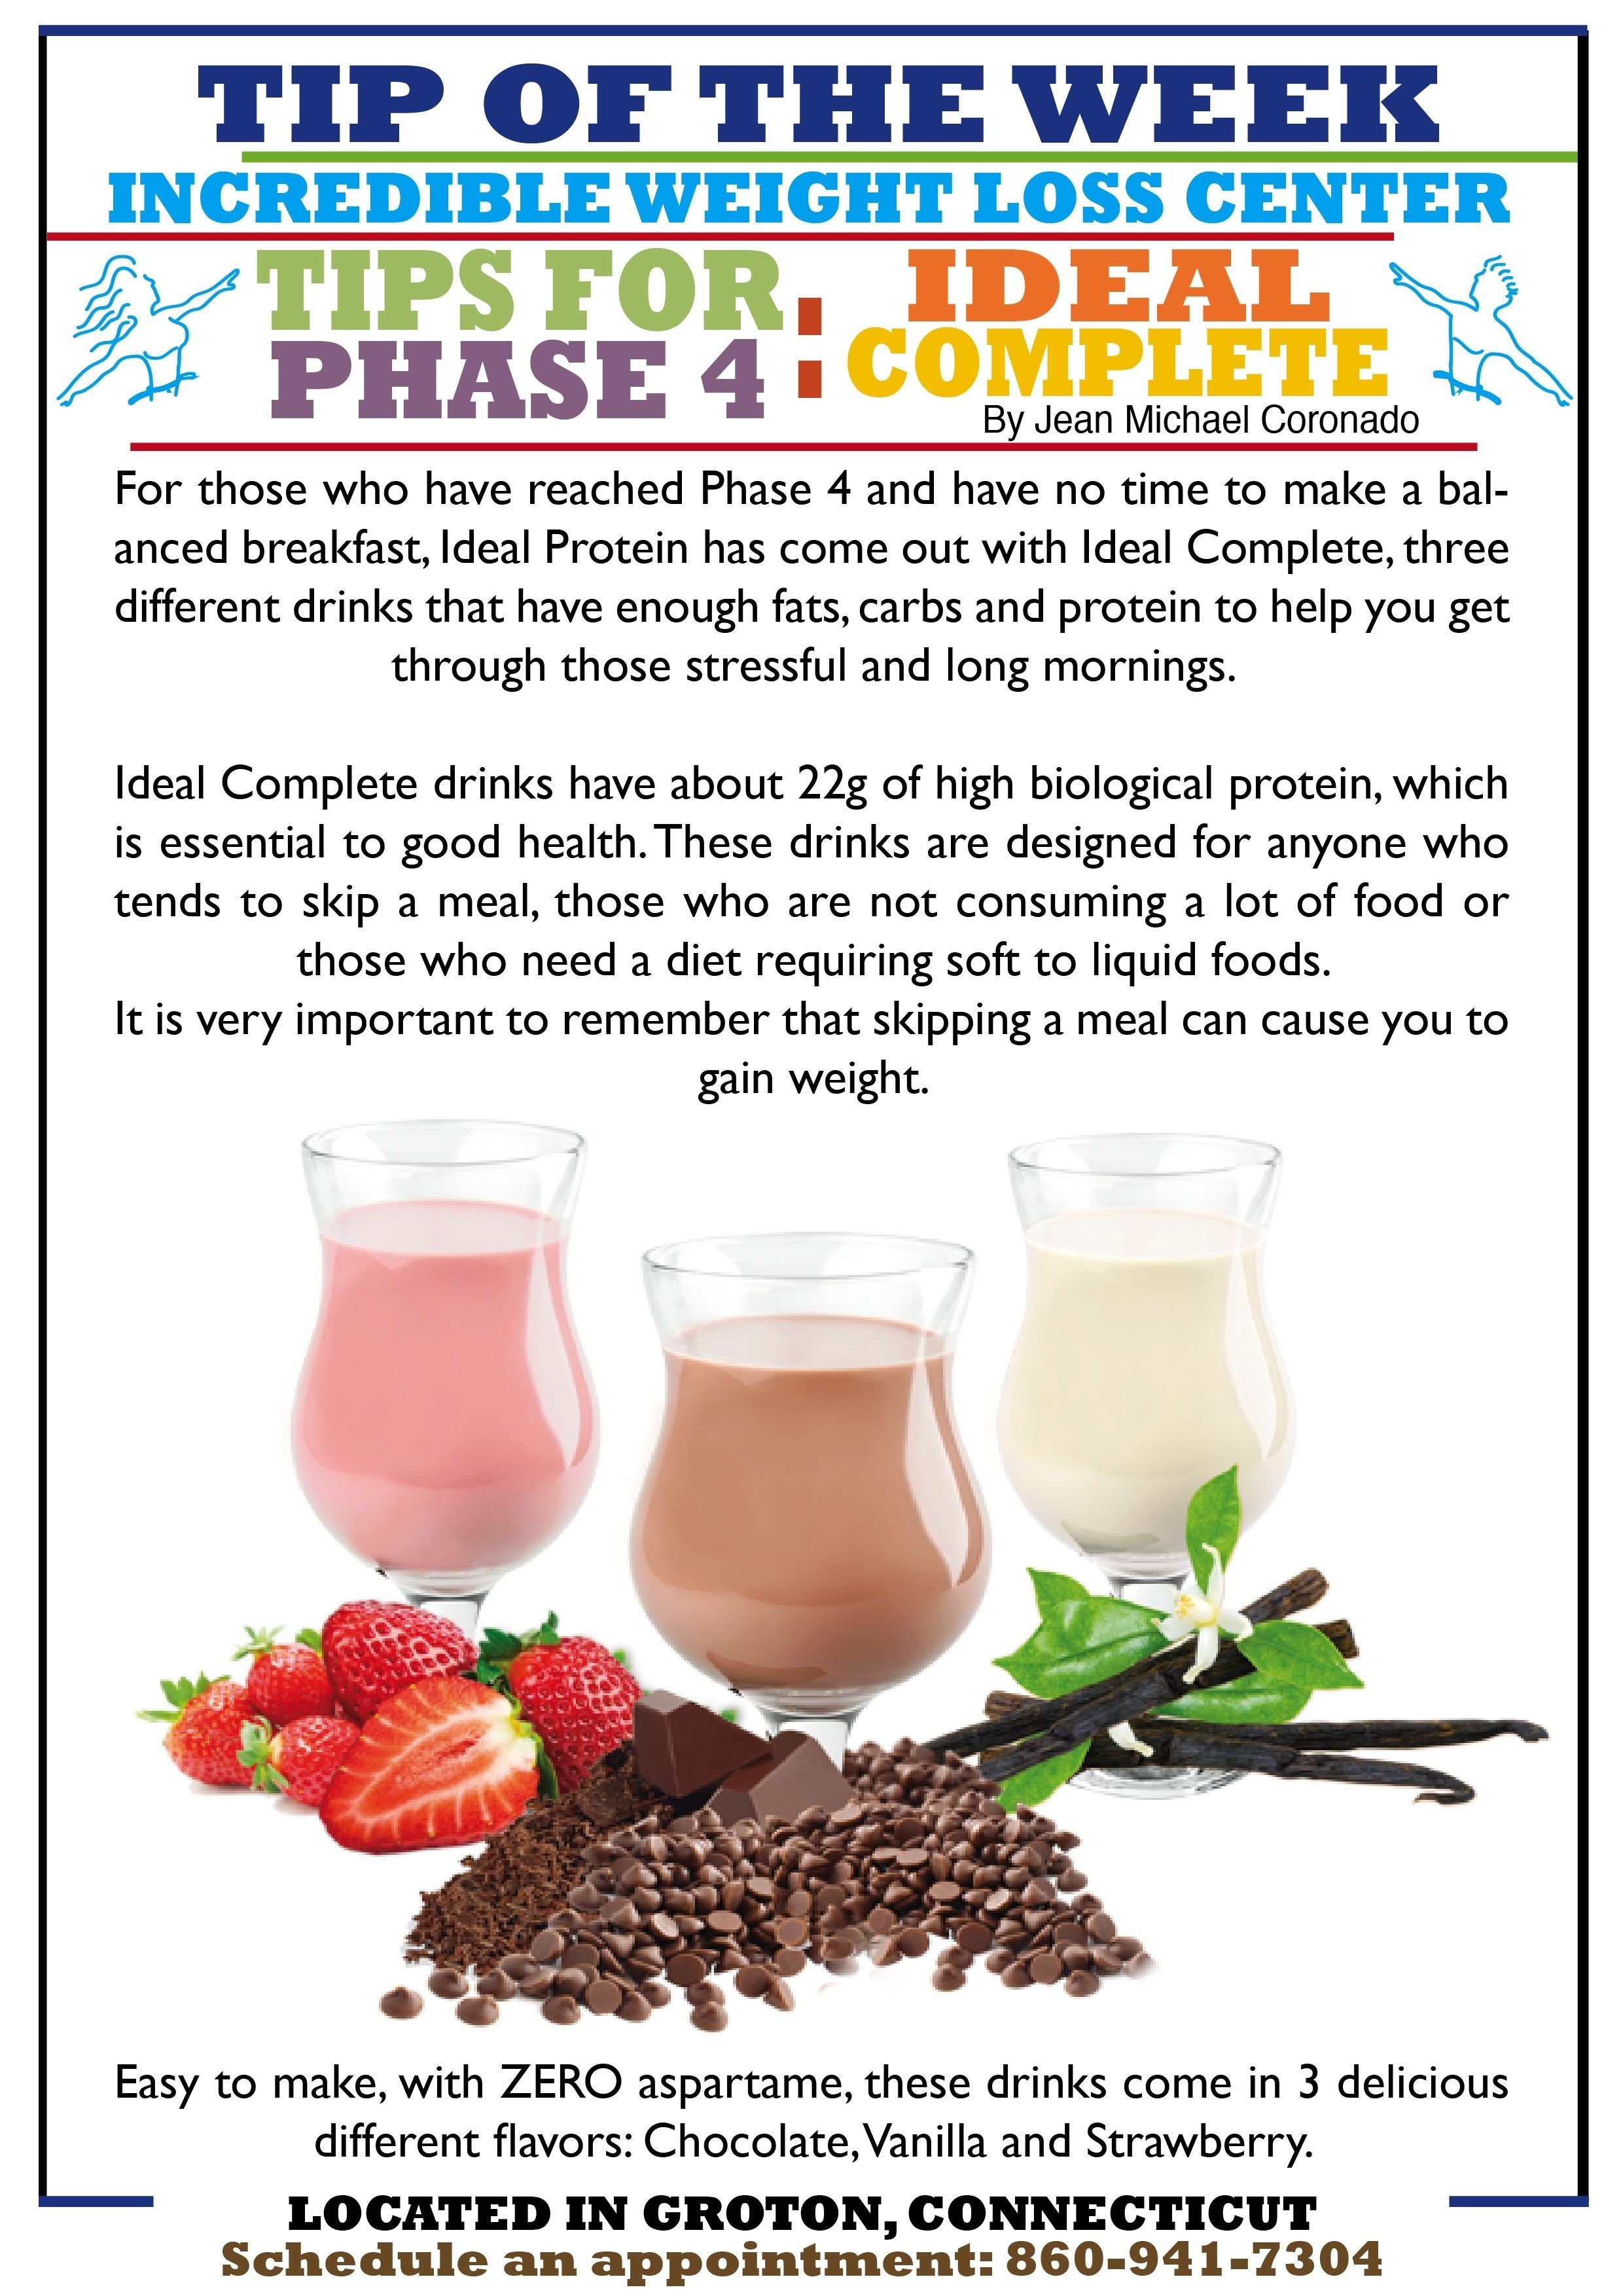 10 Lovable Ideal Protein Phase 4 Meal Ideas wondering what ideal proteins ideal complete 4 shakes ip 2022